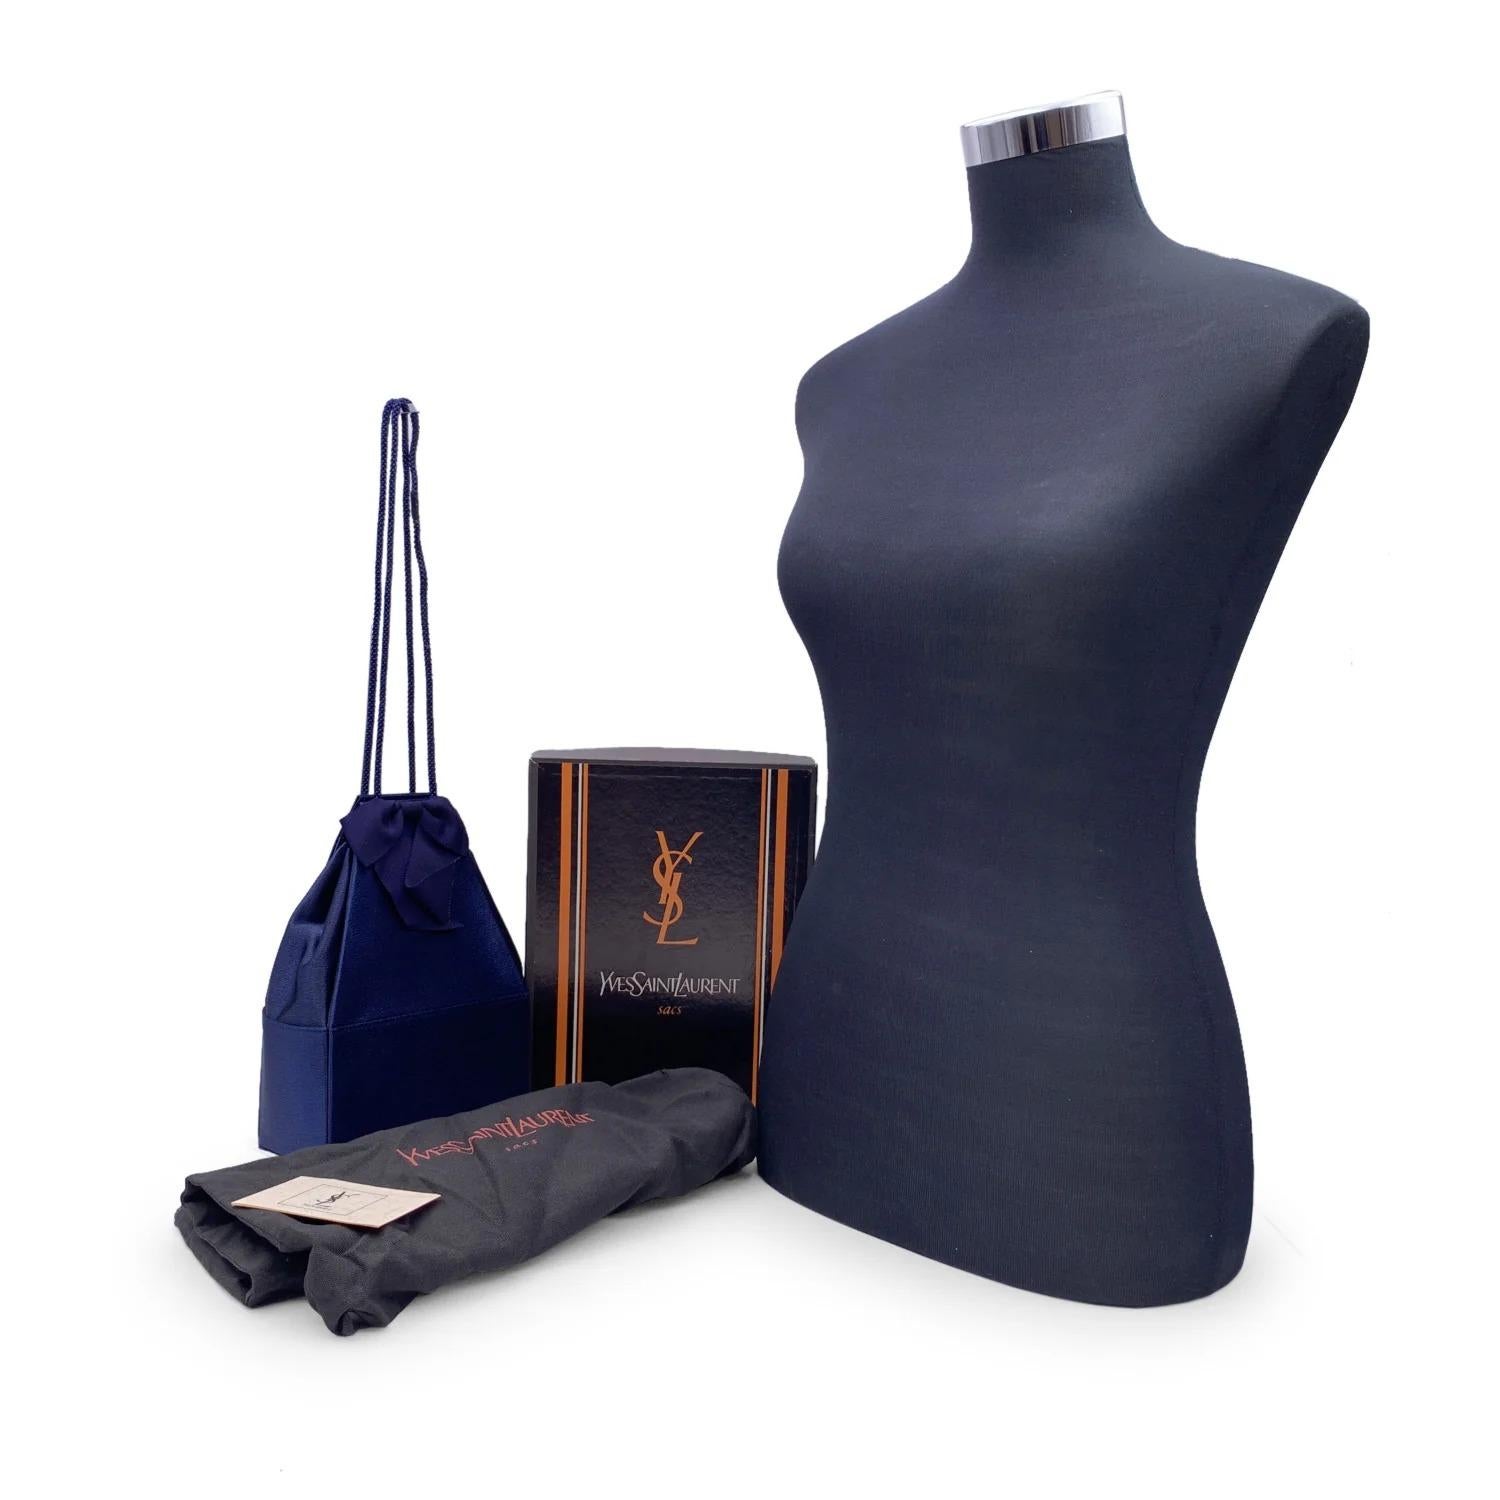 Gorgeous vintage rare small bucket shoulder or crossbody bag by Yves Saint Laurent. In dark electric blue satin, geometric pyramidal shape, with a beautiful blue ribbon on the front. Blue internal lining, with YVES SAINT LAURENT gold printed